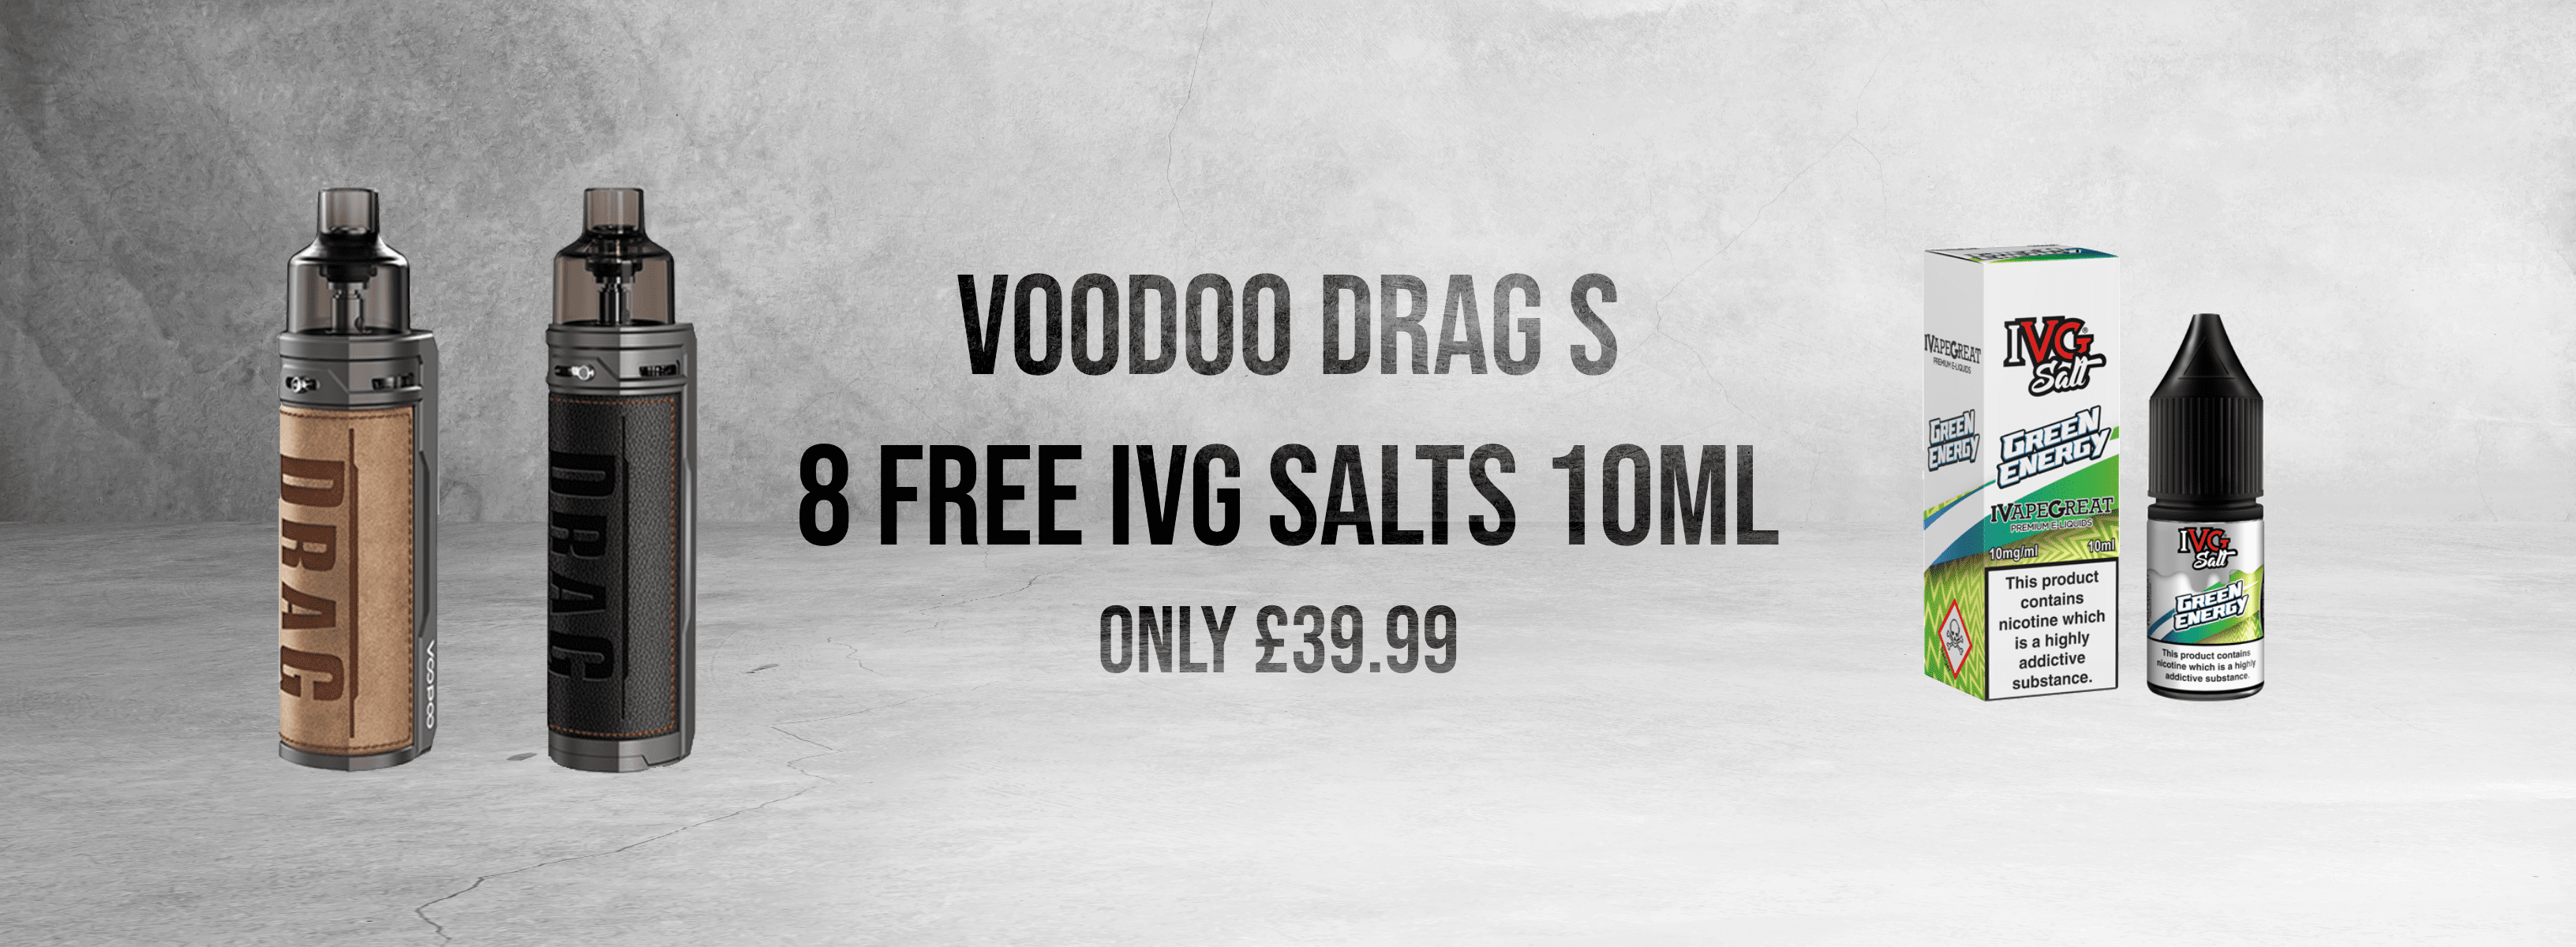 Advert for an offer on VooPoo and IVG Nic Salts products